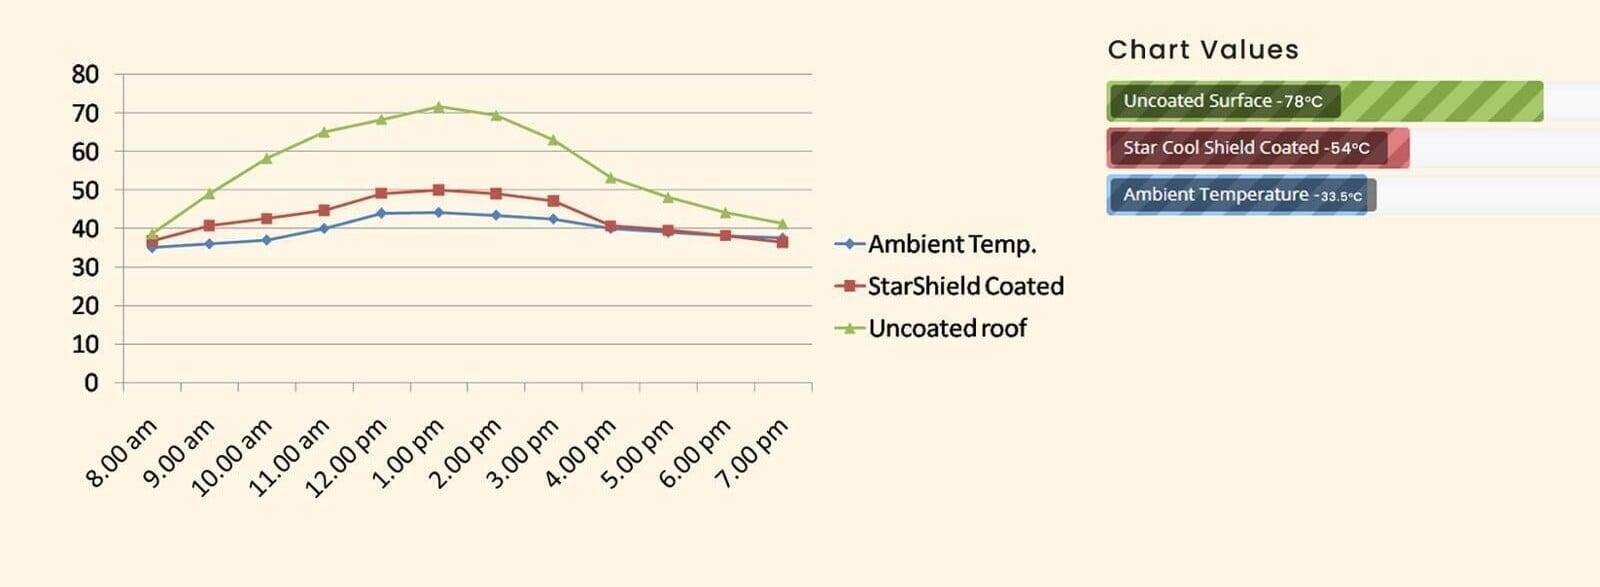 Protect your building with Star Cool Shield + Cool Roof Coating. Thermal Insulation, Solar Reflective.